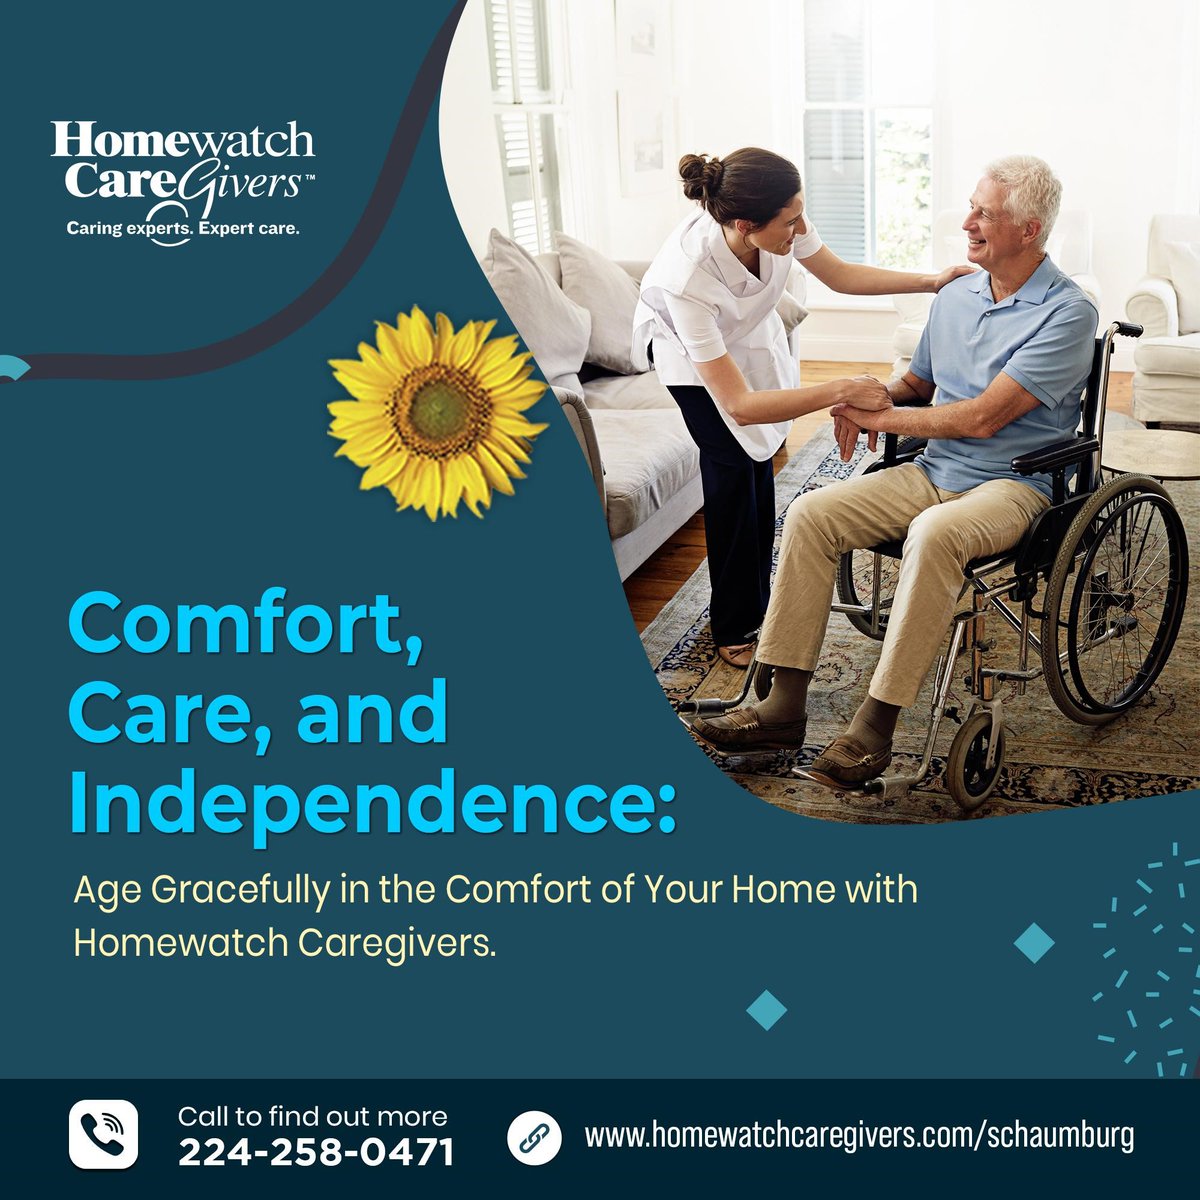 Don't worry about loved ones aging alone. We provide #compassionate in-#homecare that allows #seniors to live gracefully and safely in the comfort of their own homes.
Let #Homewatch #Caregivers #help your loved ones thrive at home!
#personalcare #medicationcare #reminders